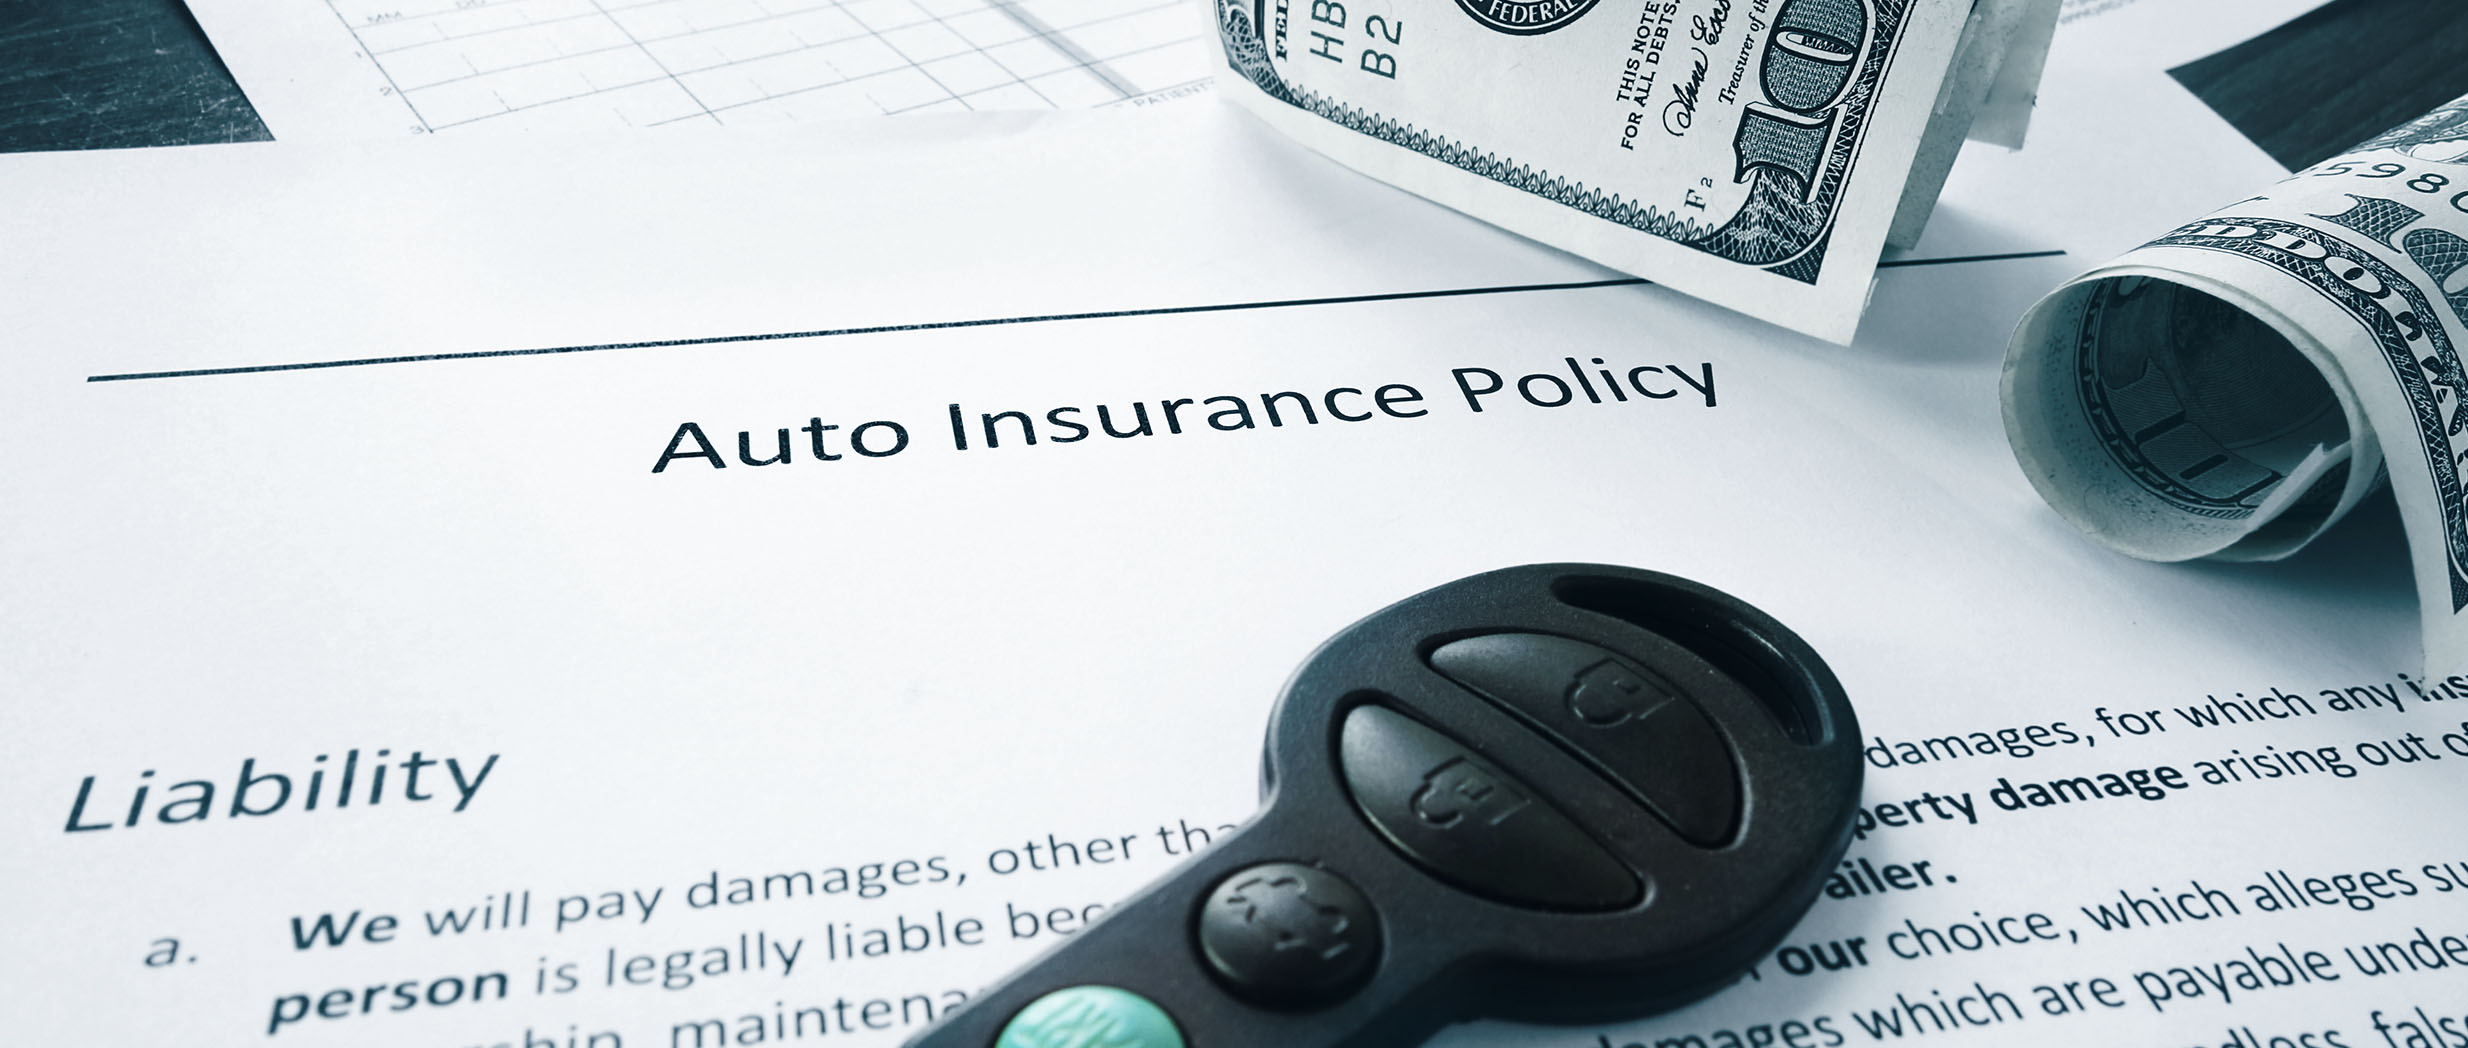 Auto Insurance Policy lays on desk.